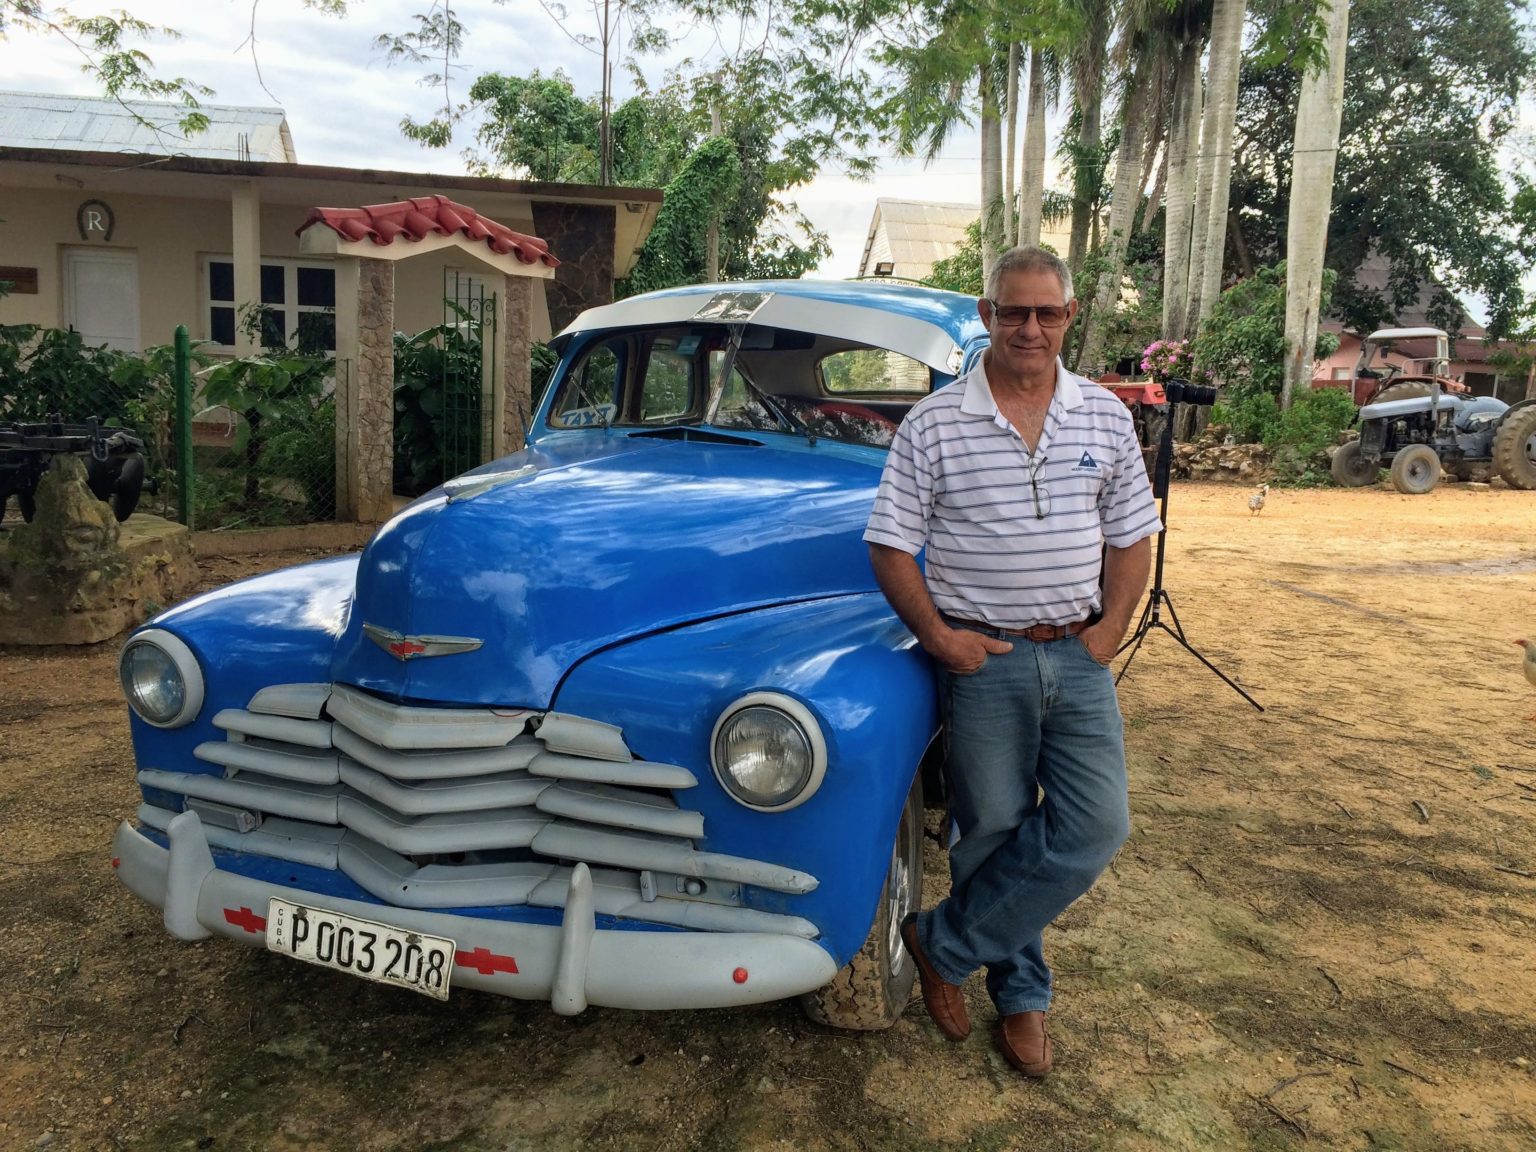 Driver Benino standing beside classic blue car in Vinales